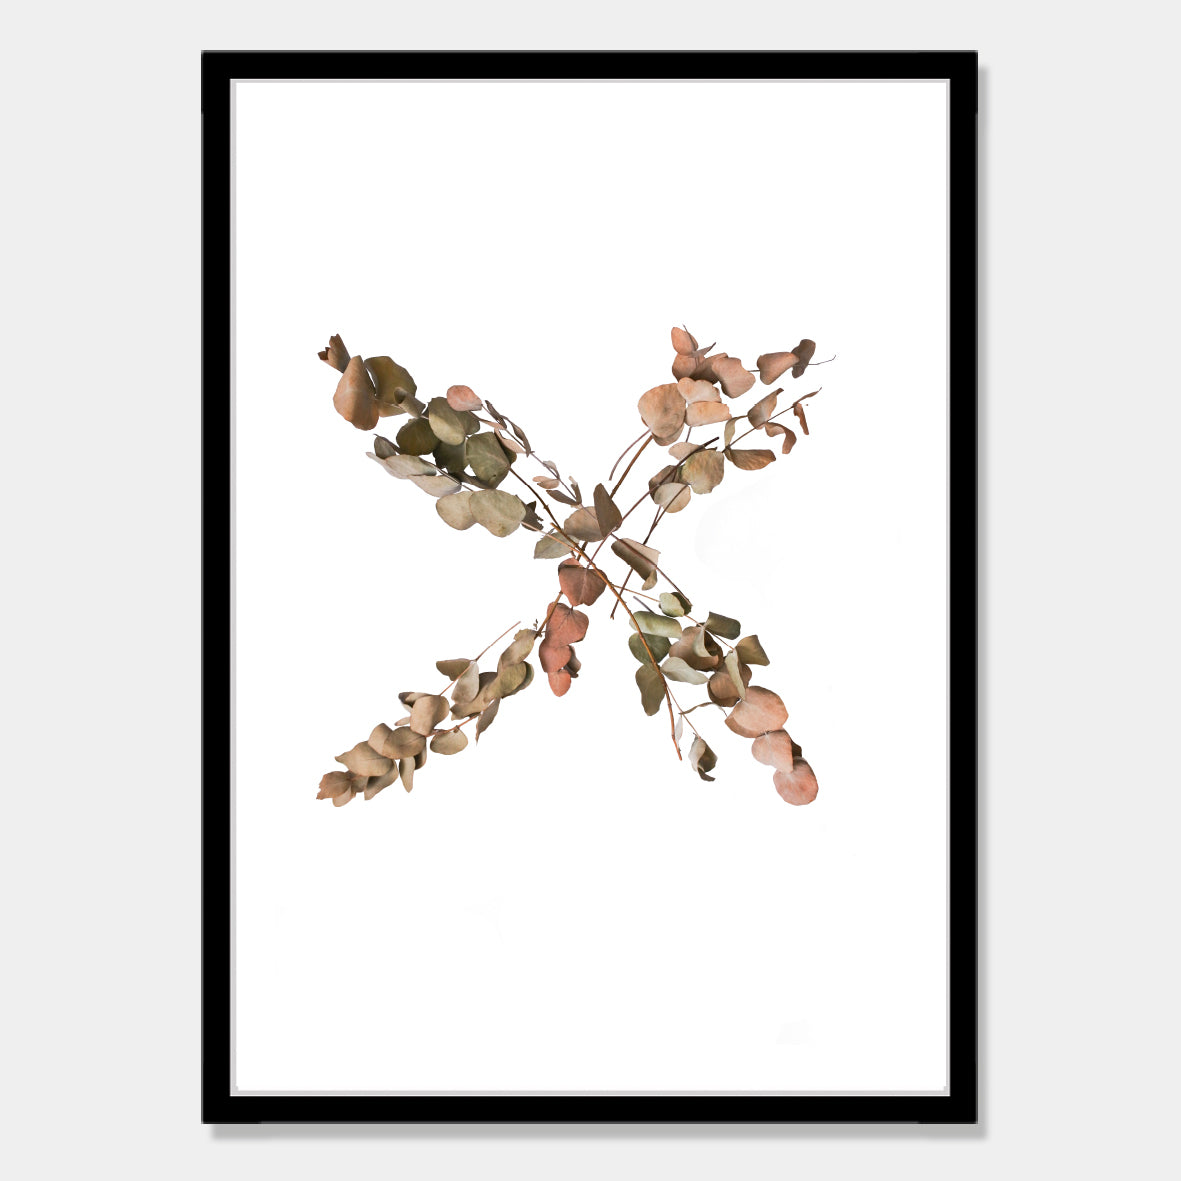 Photographic art print of dried leaves in a X shape by Bon Jung. Printed in New Zealand by endemicworld and framed in black.